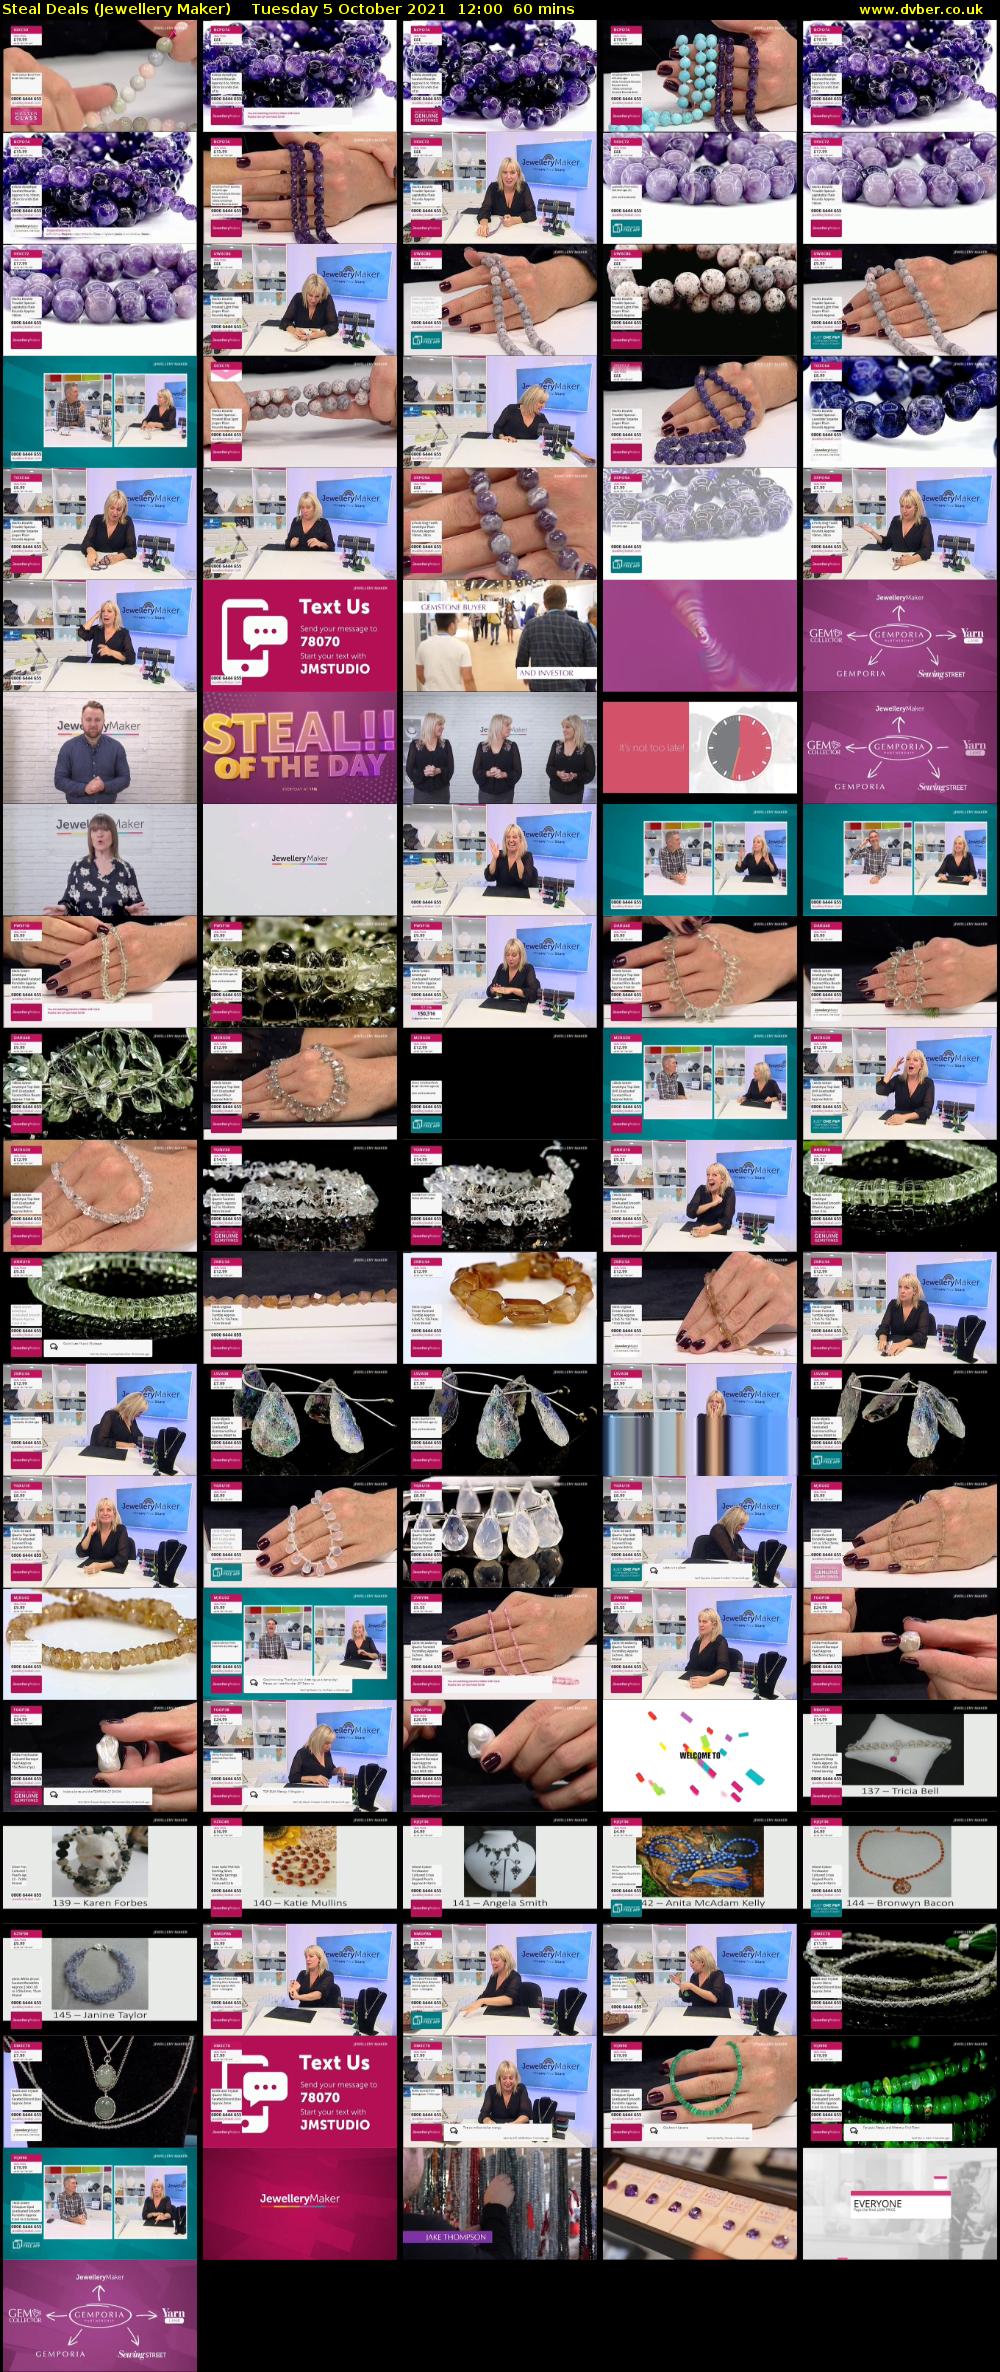 Steal Deals (Jewellery Maker) Tuesday 5 October 2021 12:00 - 13:00